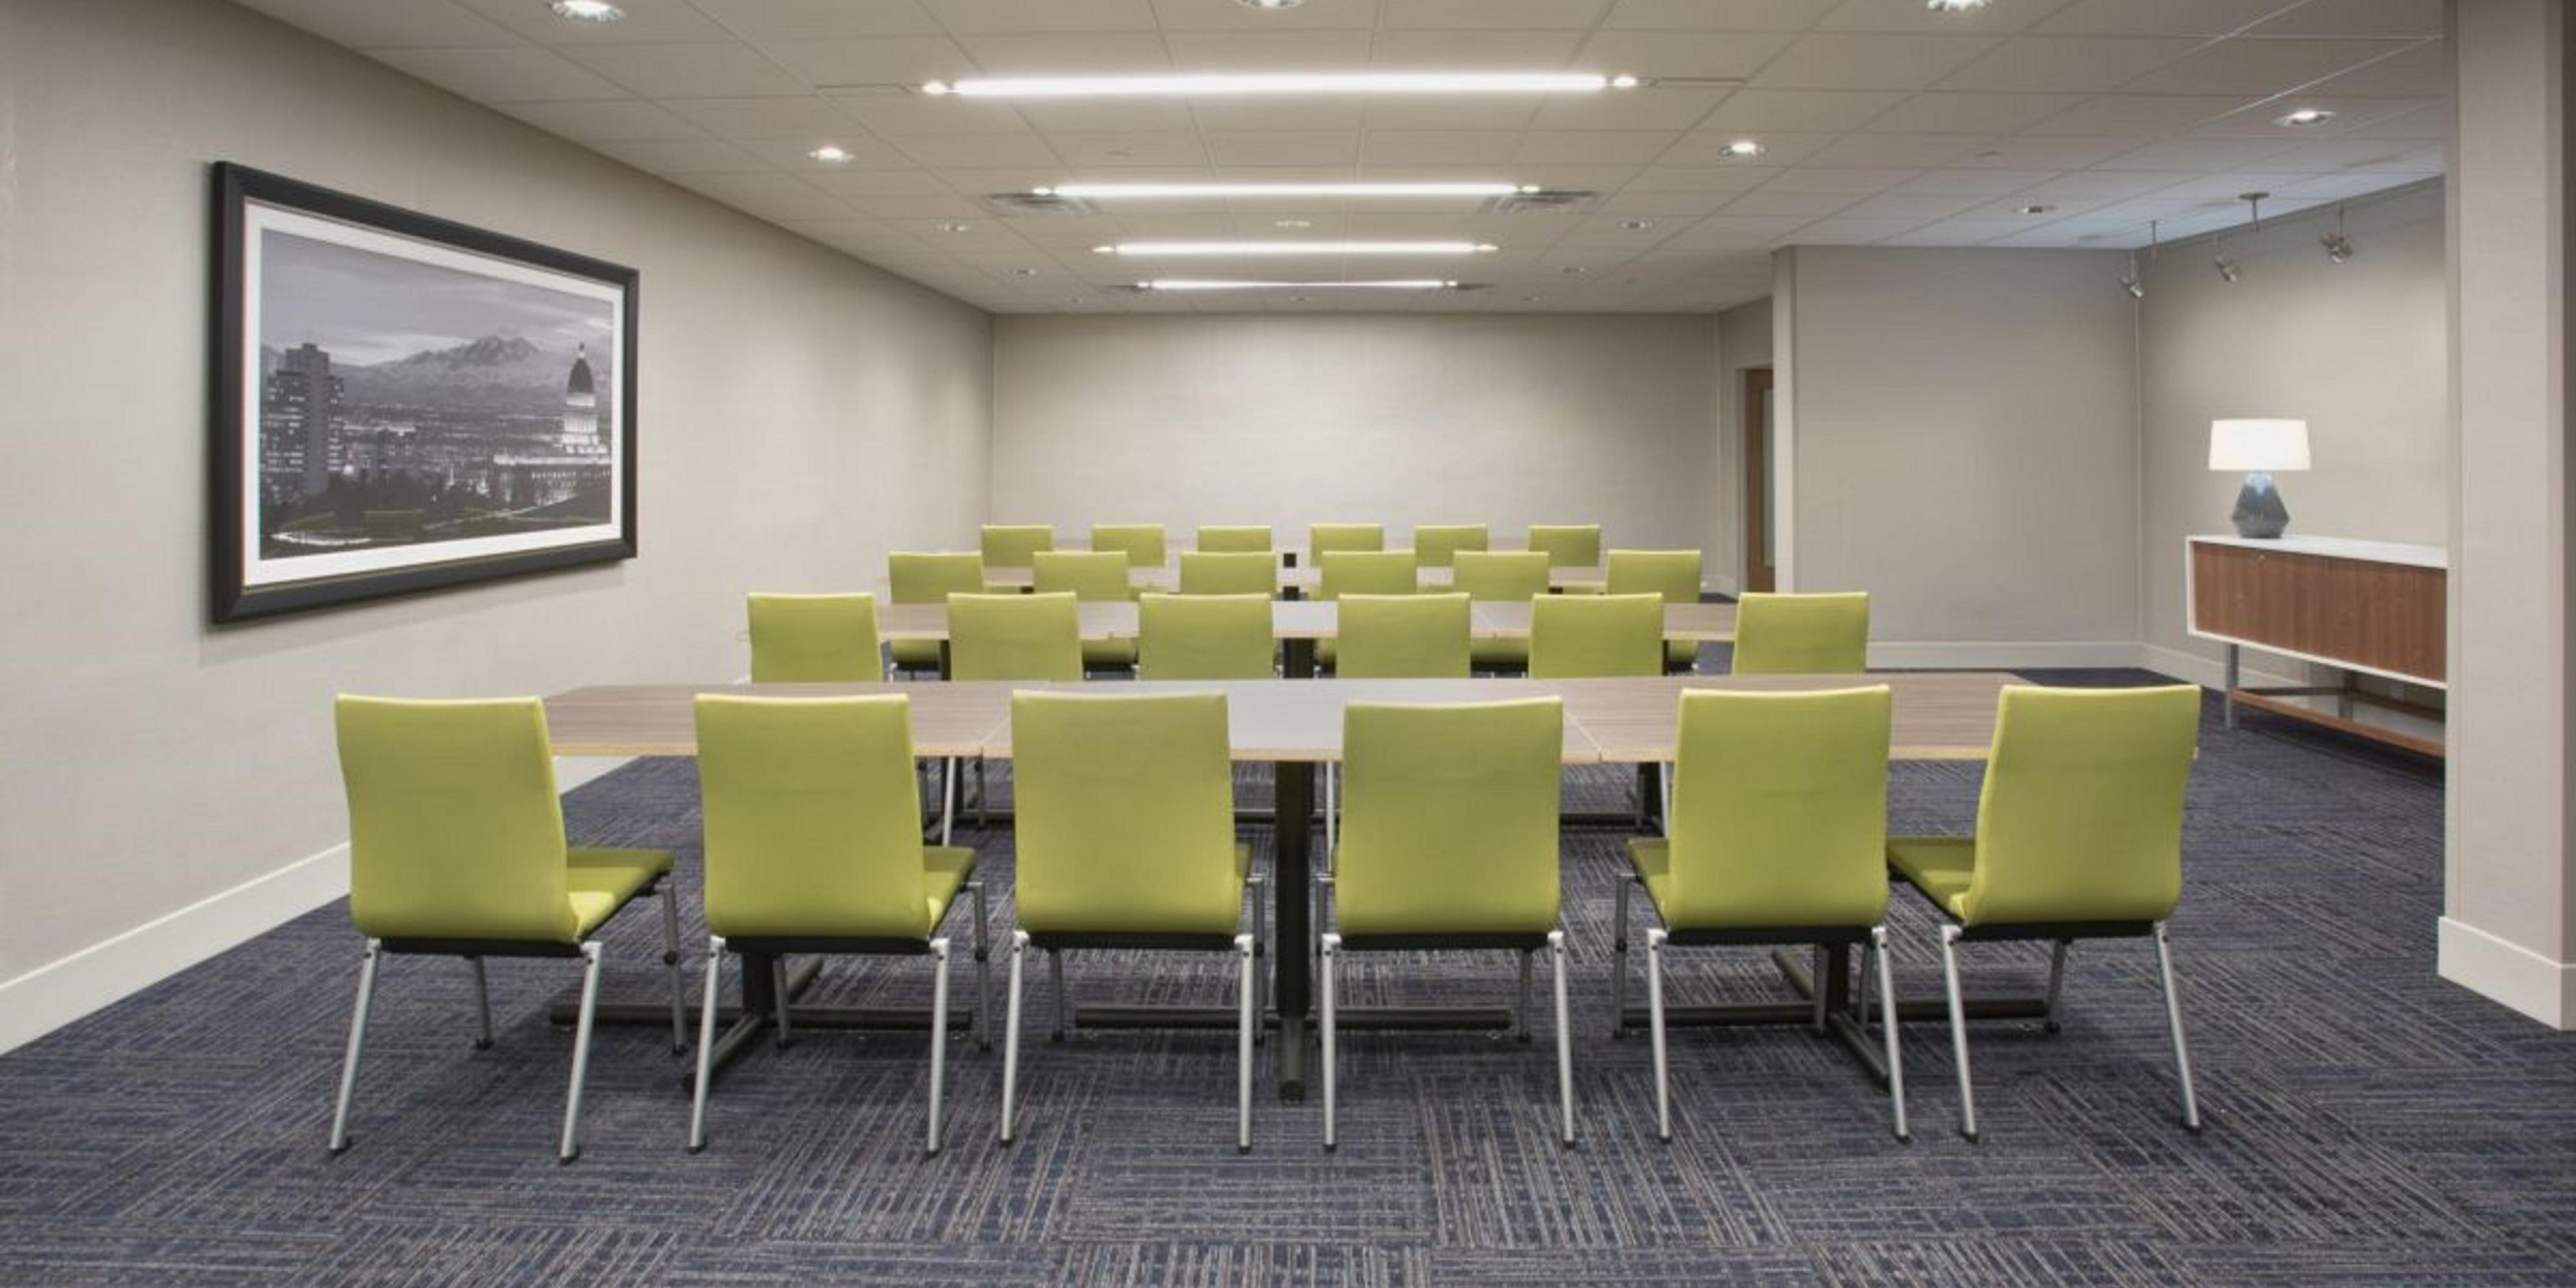 Our brand new Parsons Convention Center is 8000 square feet! It features a 4000 square foot meeting room that can be broke into 4 meeting rooms. It also has a warming kitchen and a lounge room!